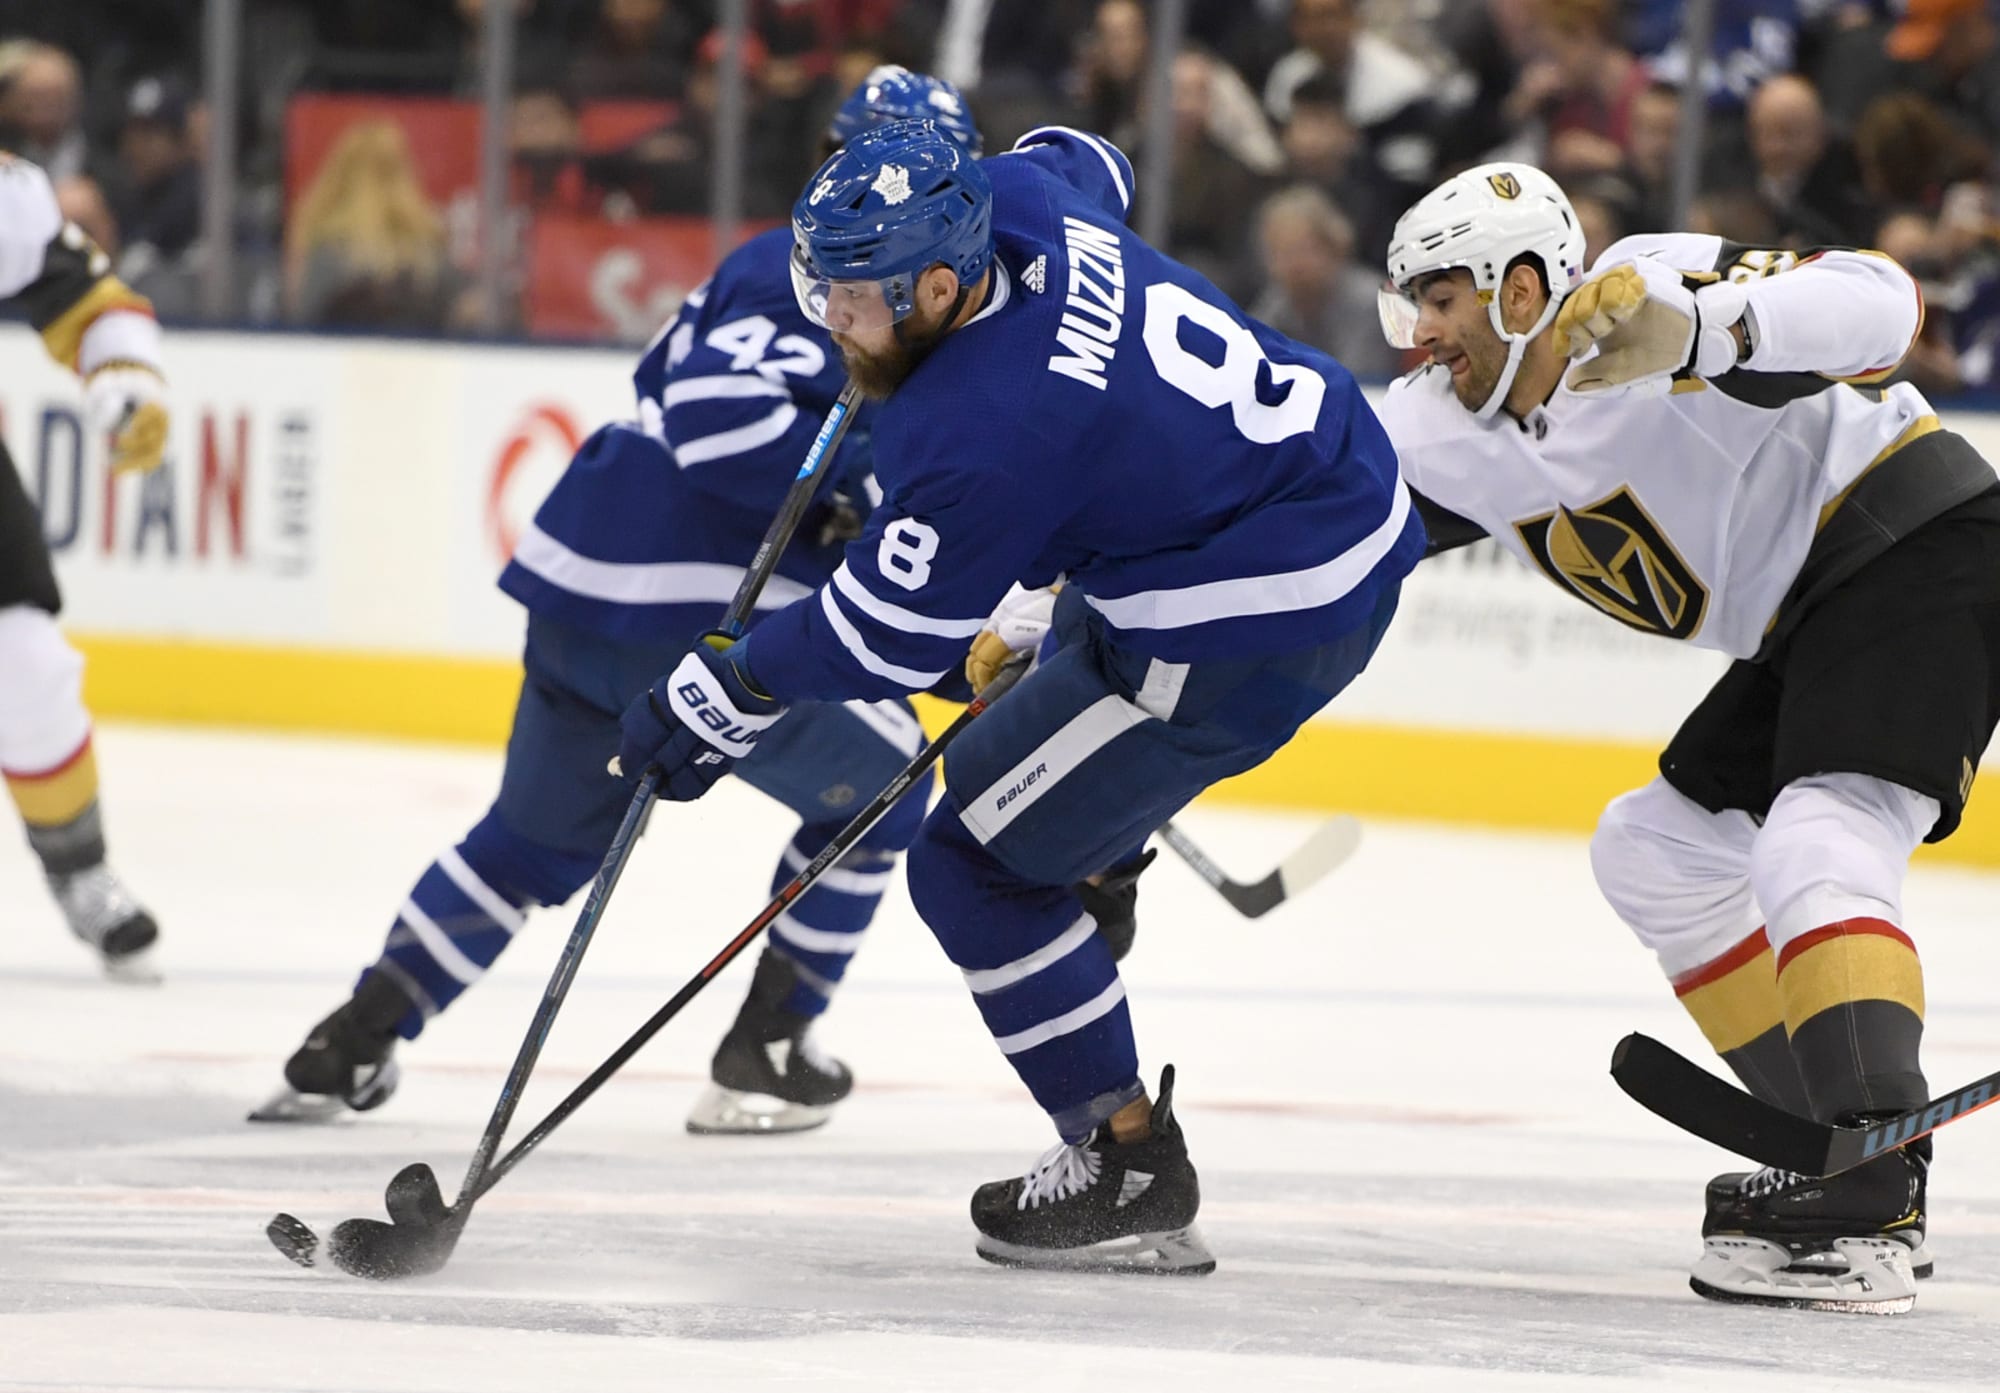 Maple Leafs defenceman Jake Muzzin out for remainder of preliminary round  series